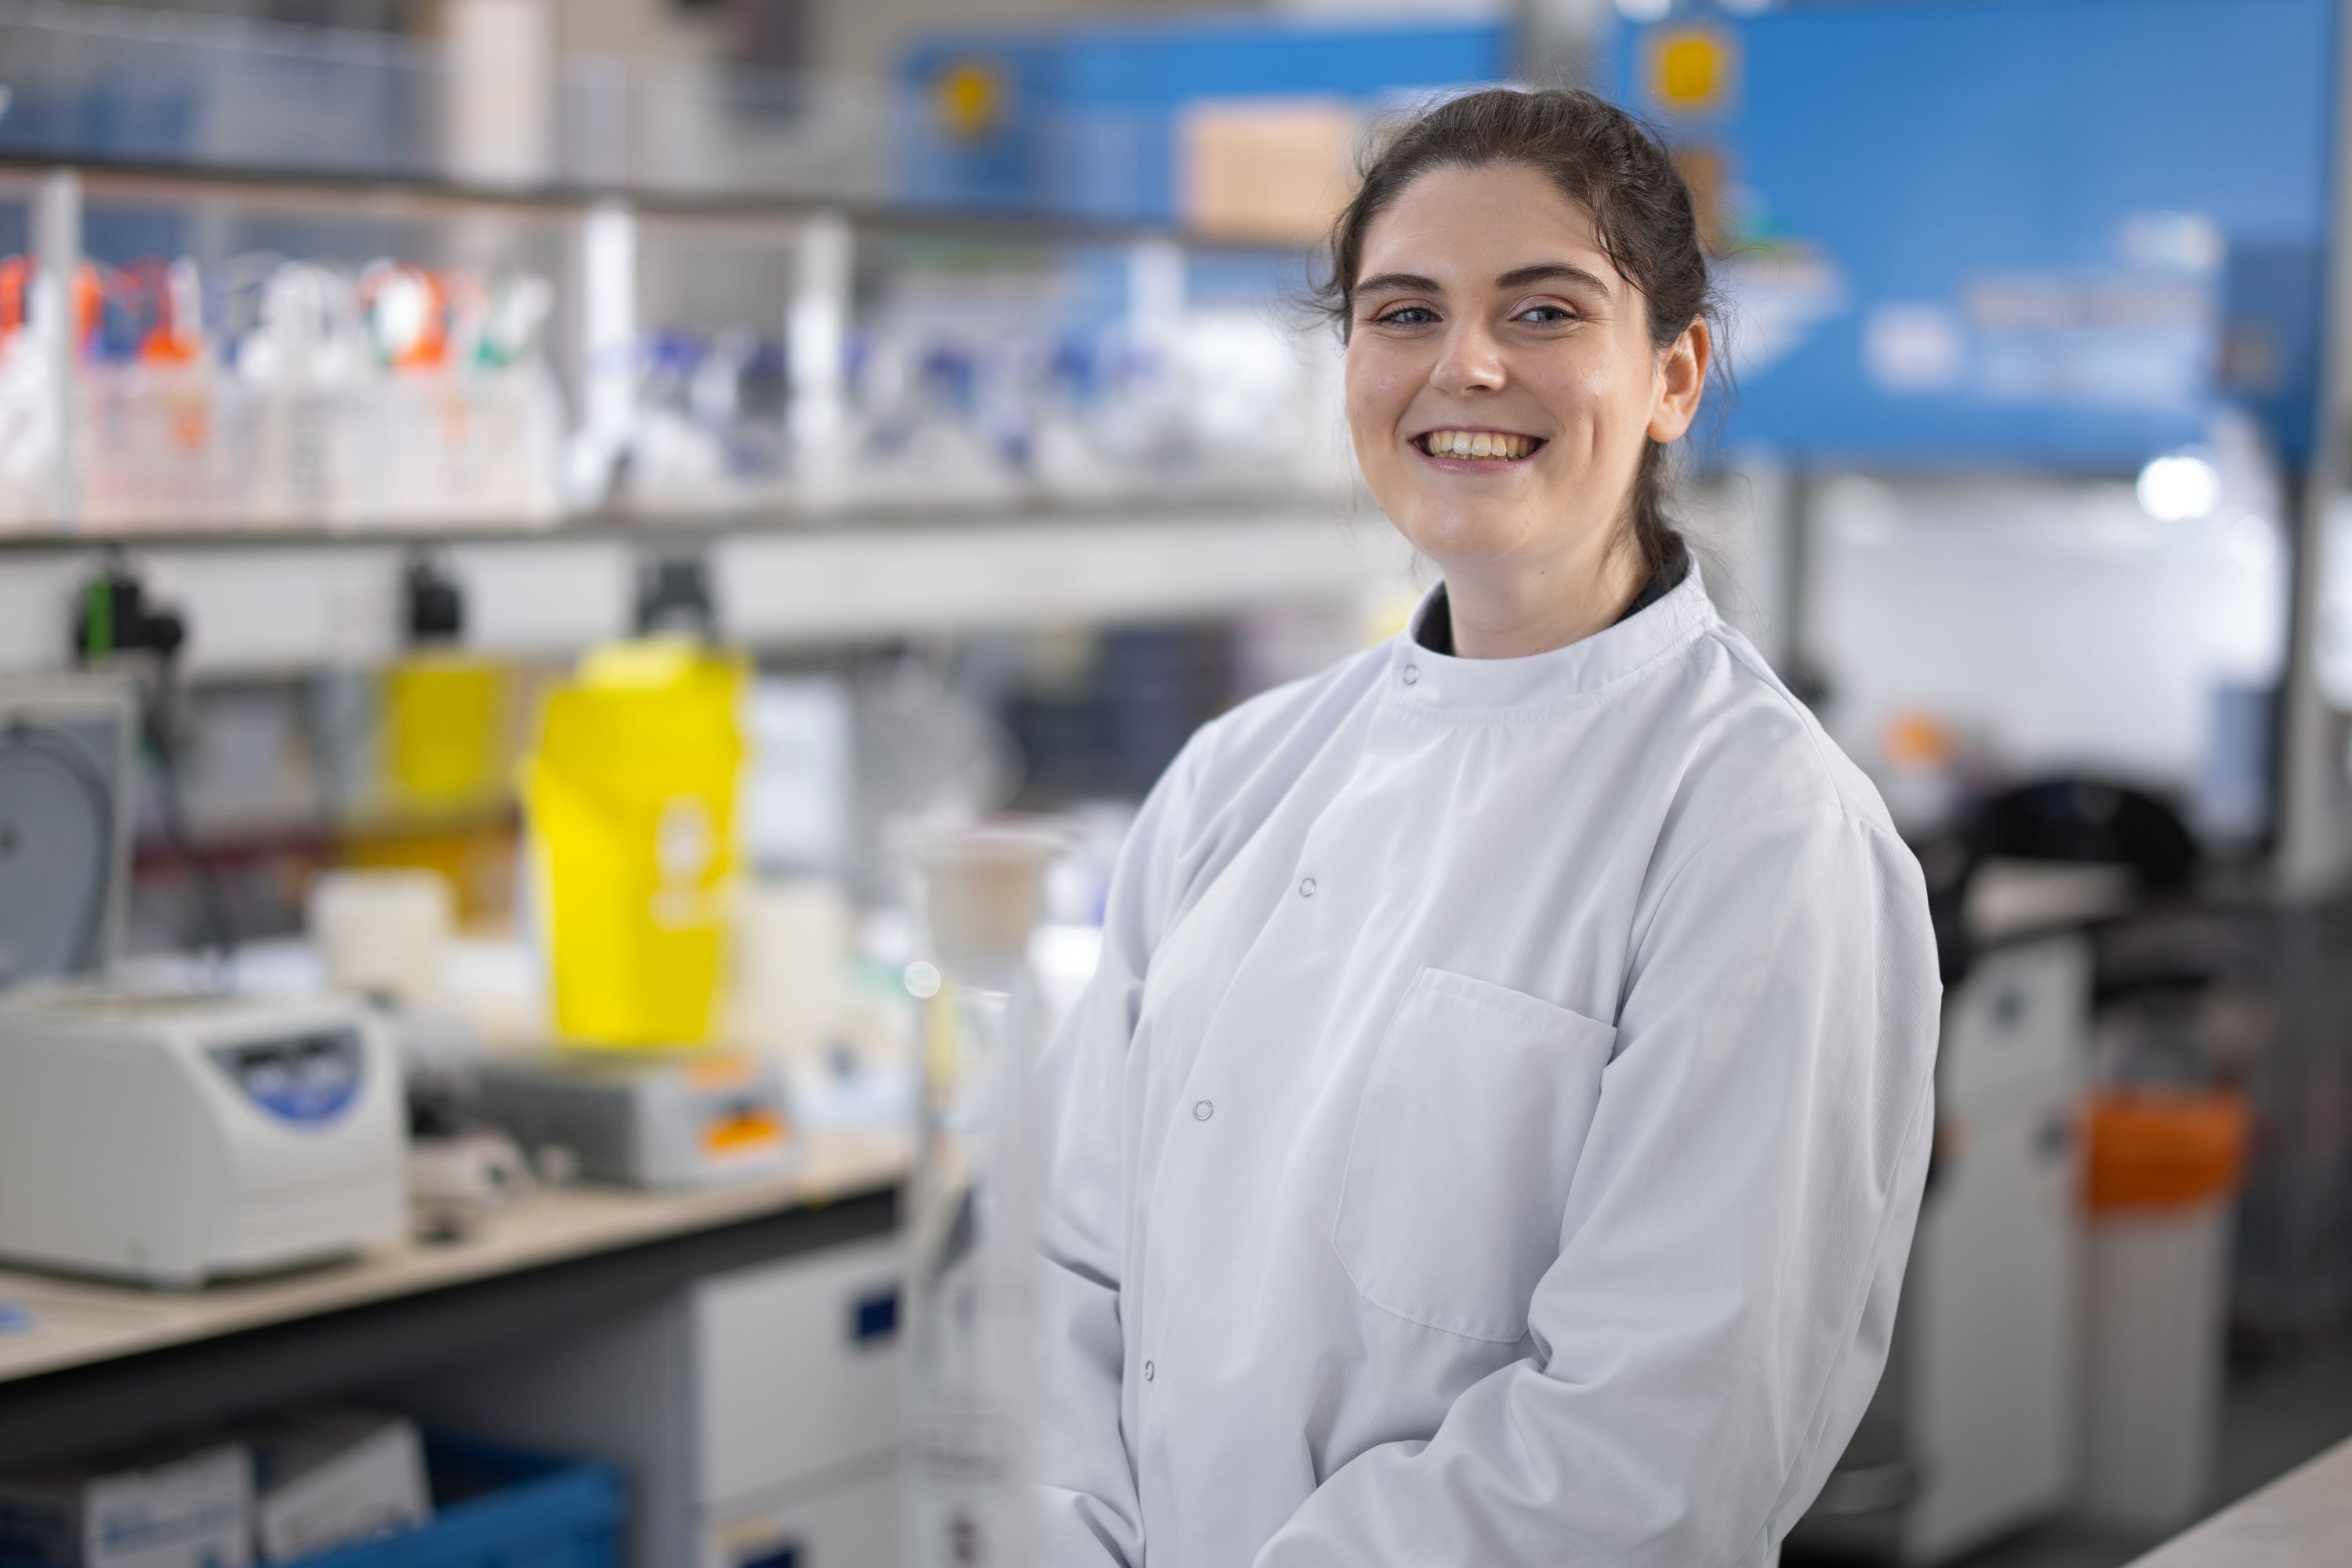 A female student smiling in a lab